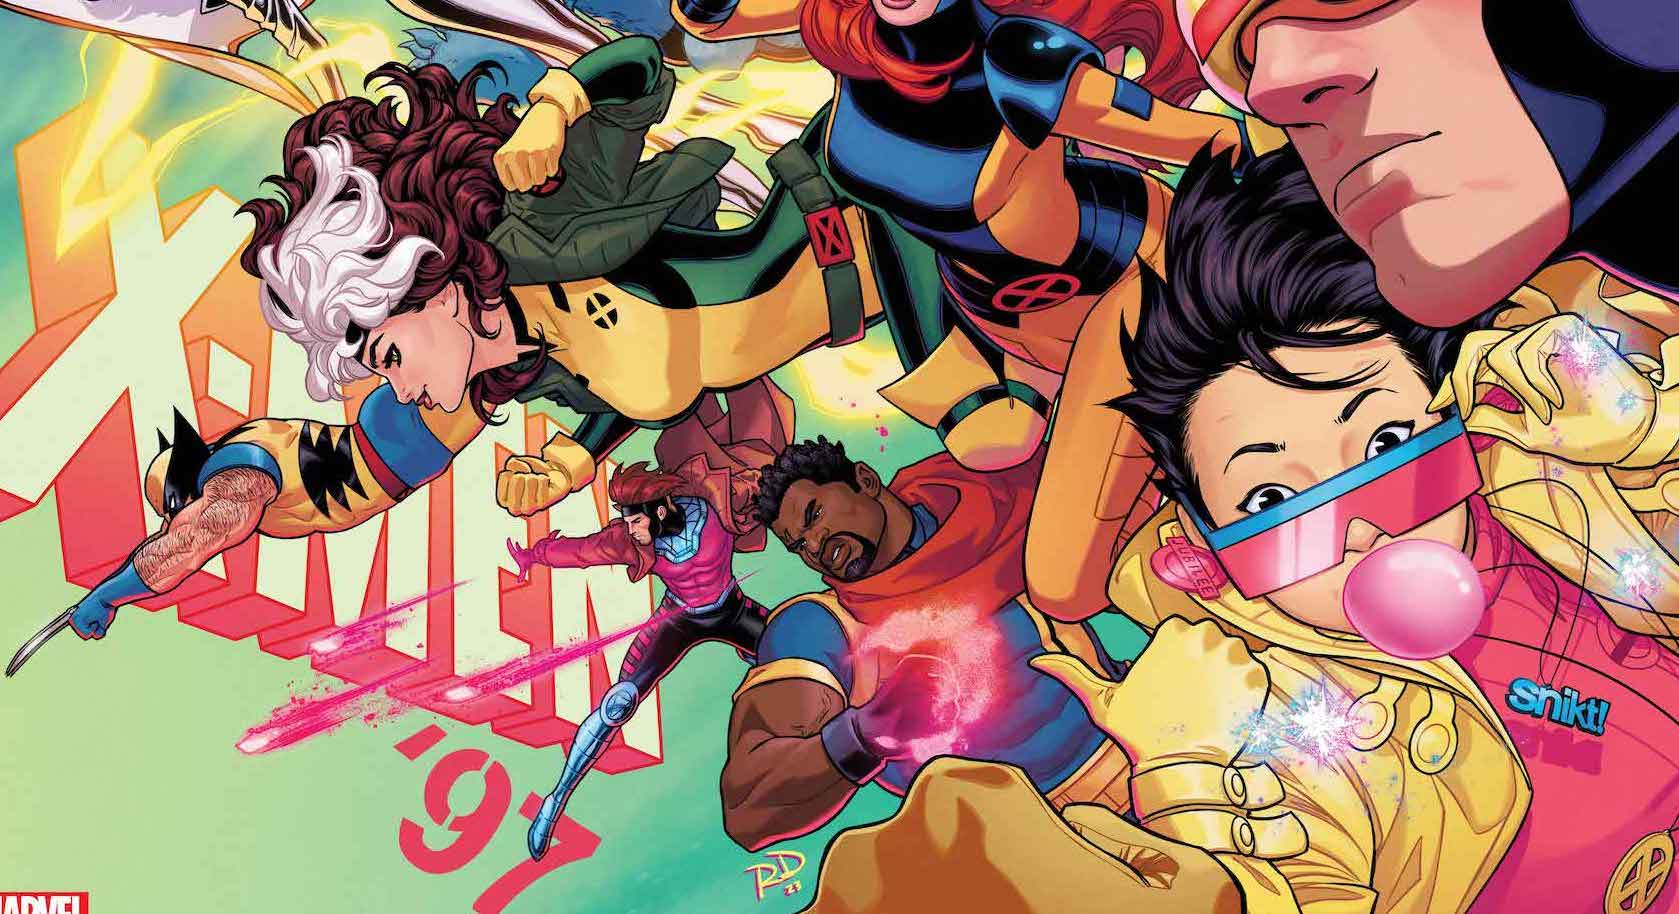 'X-Men '97' #1 scores awesome Russell Dauterman variant cover